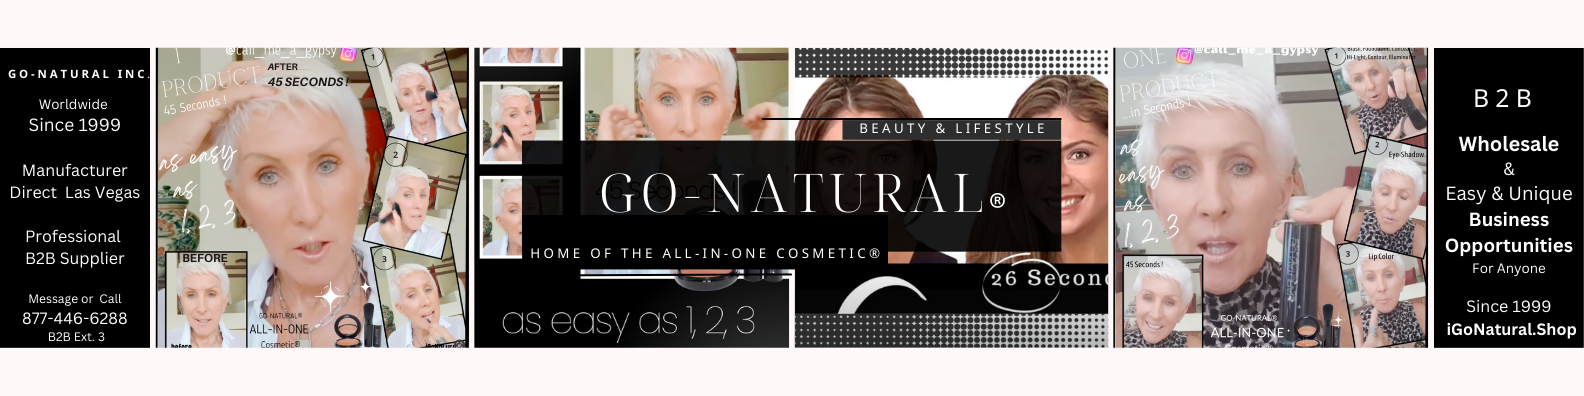 go natural all in one cosmetic b2b business opportunities wholesale 